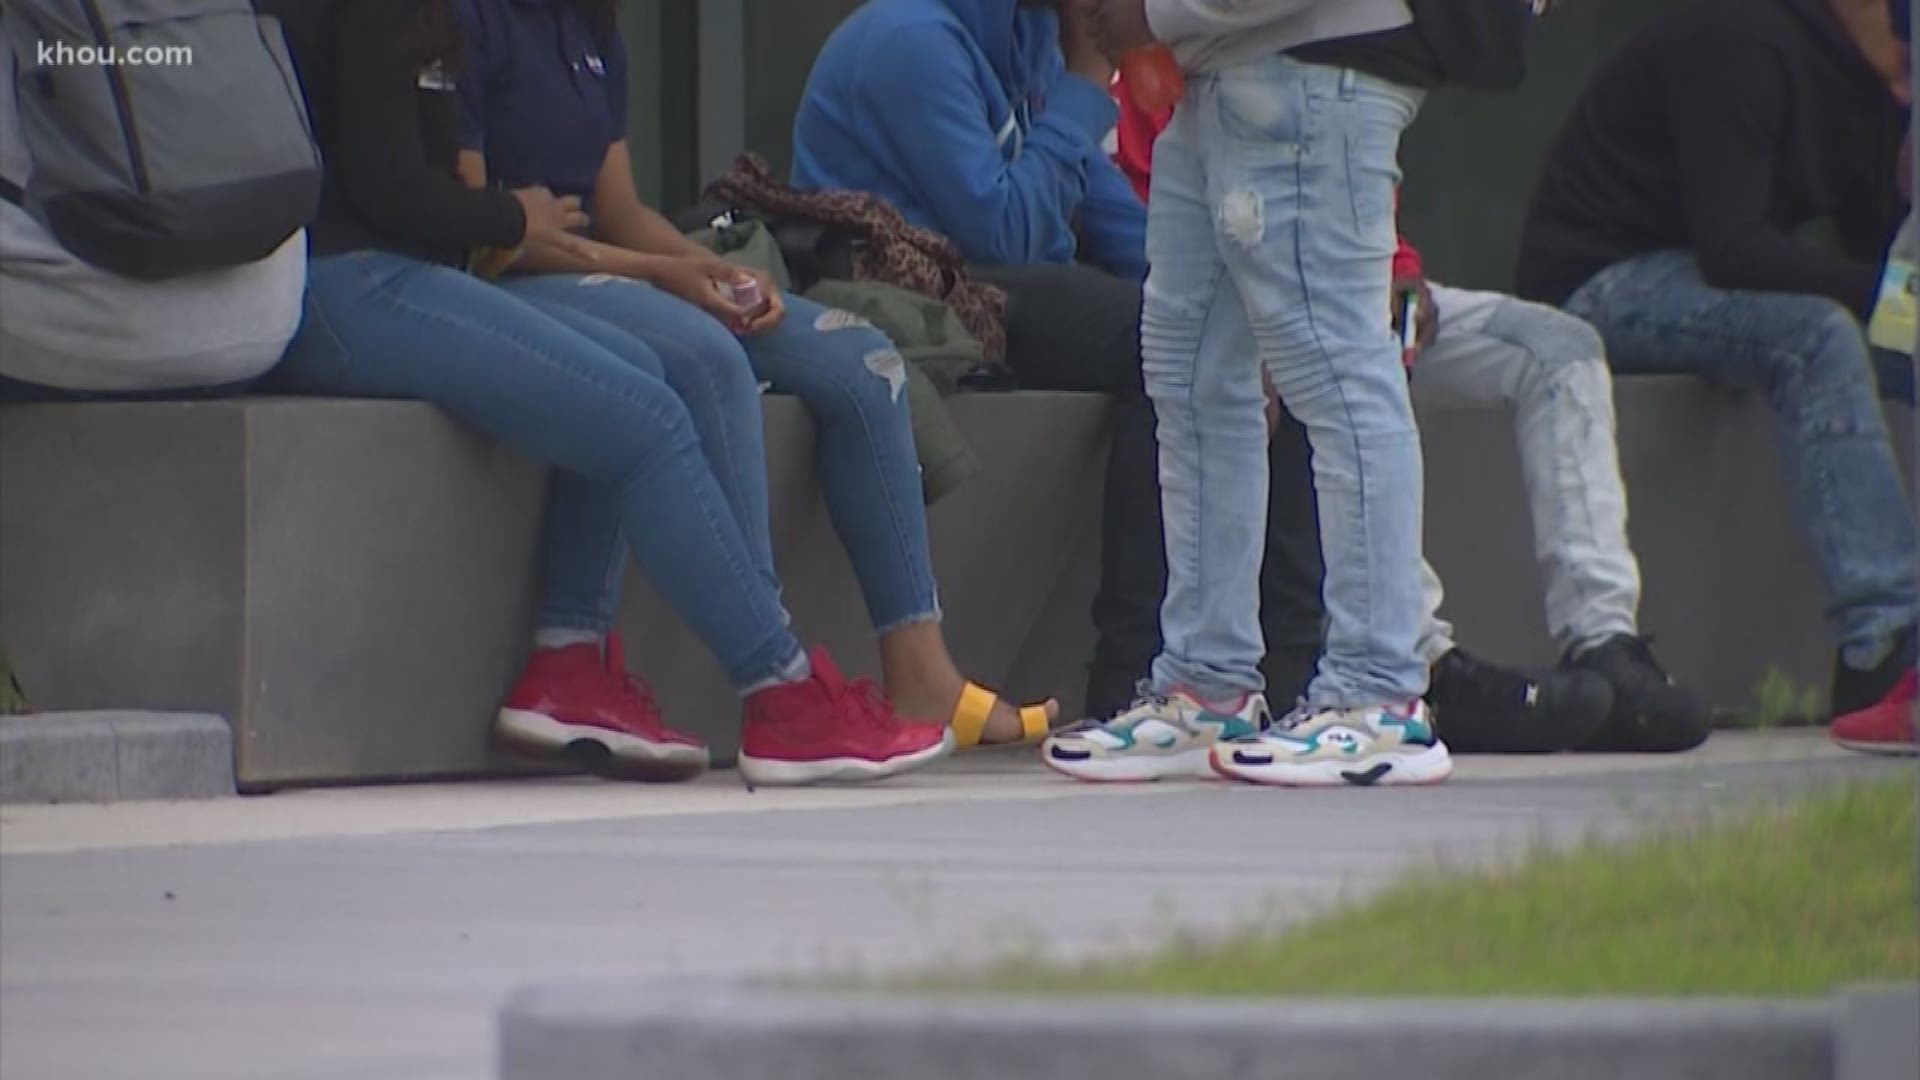 A parent dress code is being enforced at James Madison High School in south Houston.